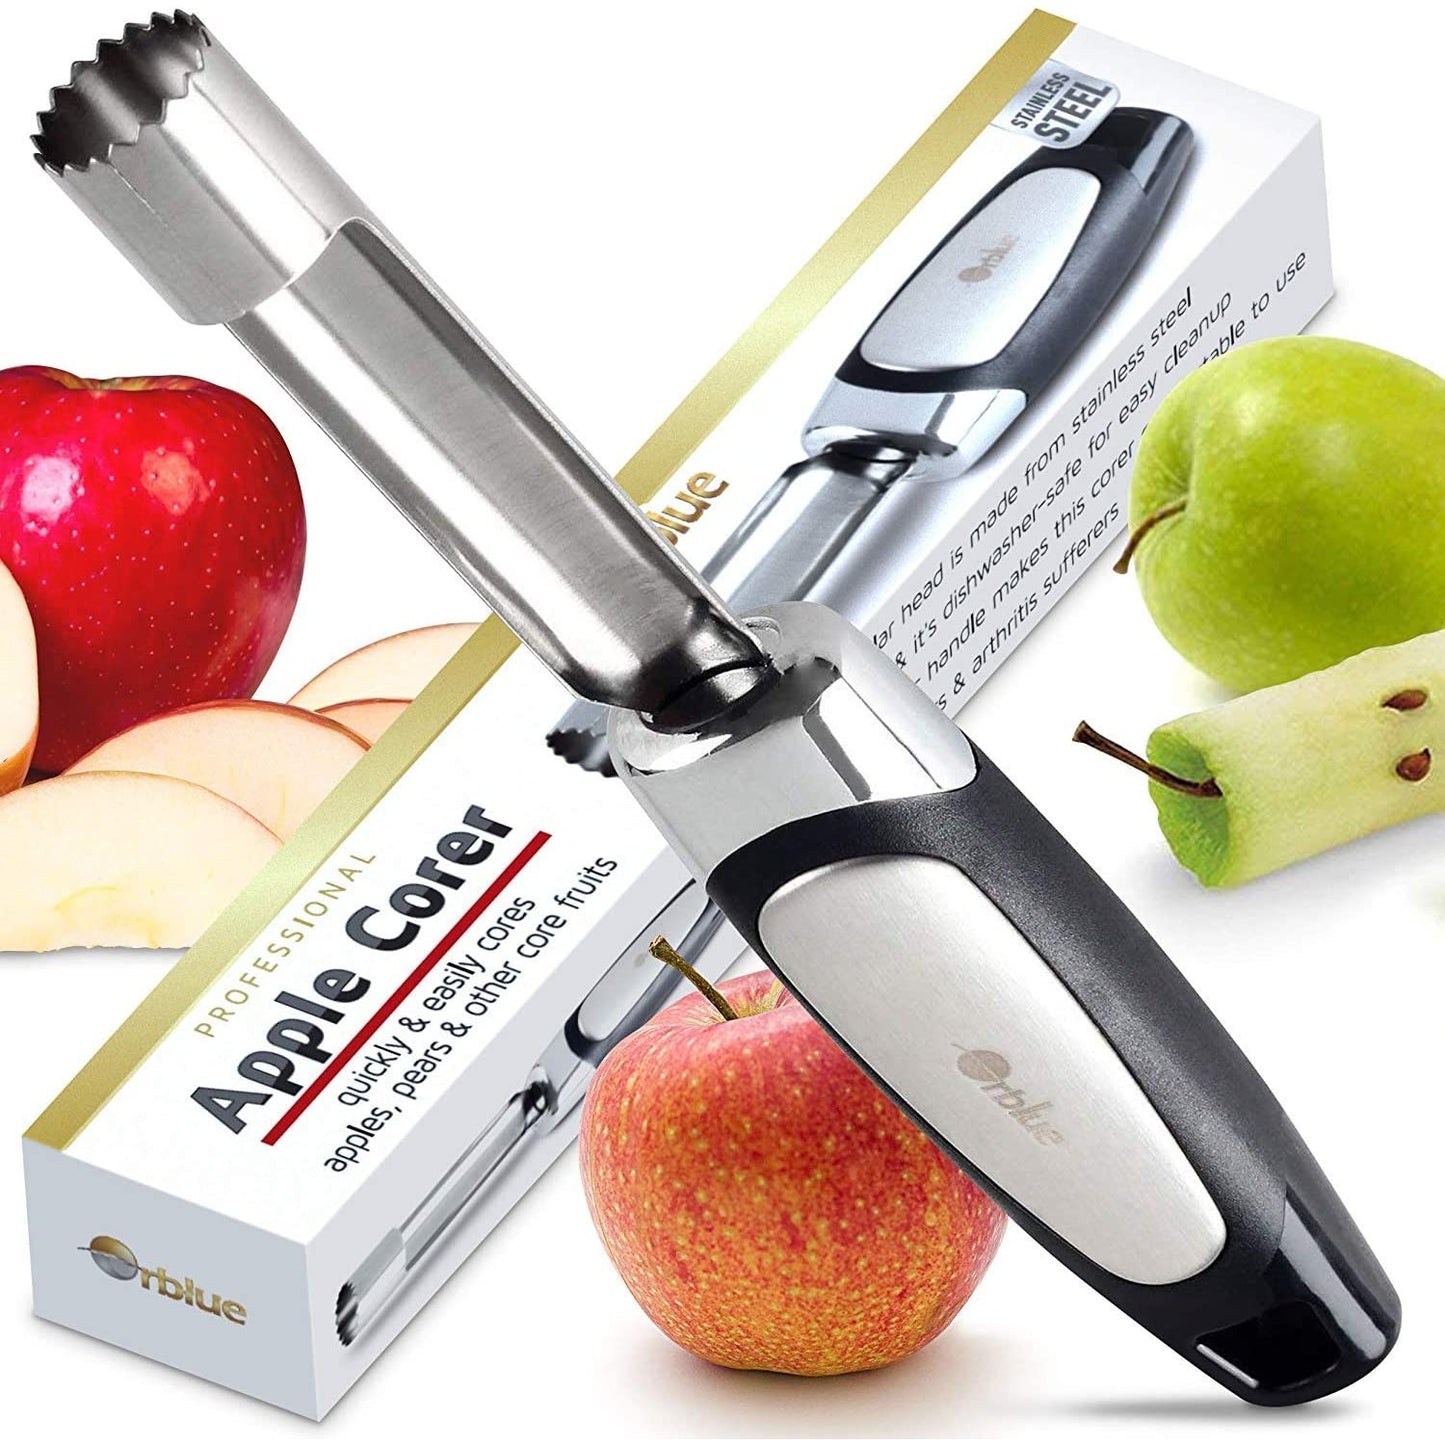 A stainless steel apple corer with a cored apple nearby. There are also two red apples nearby. The box for the corer can also be seen.